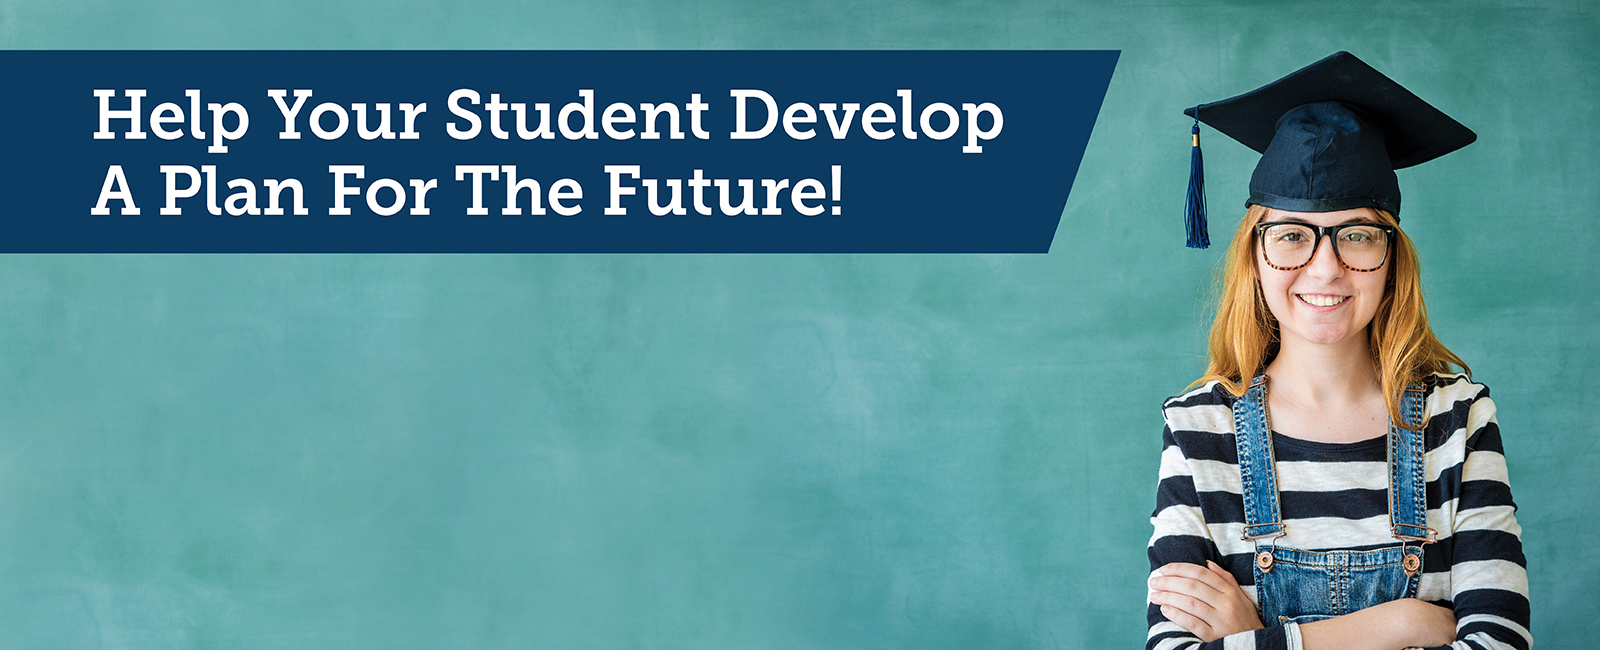 Help your student develop a plan for the future!